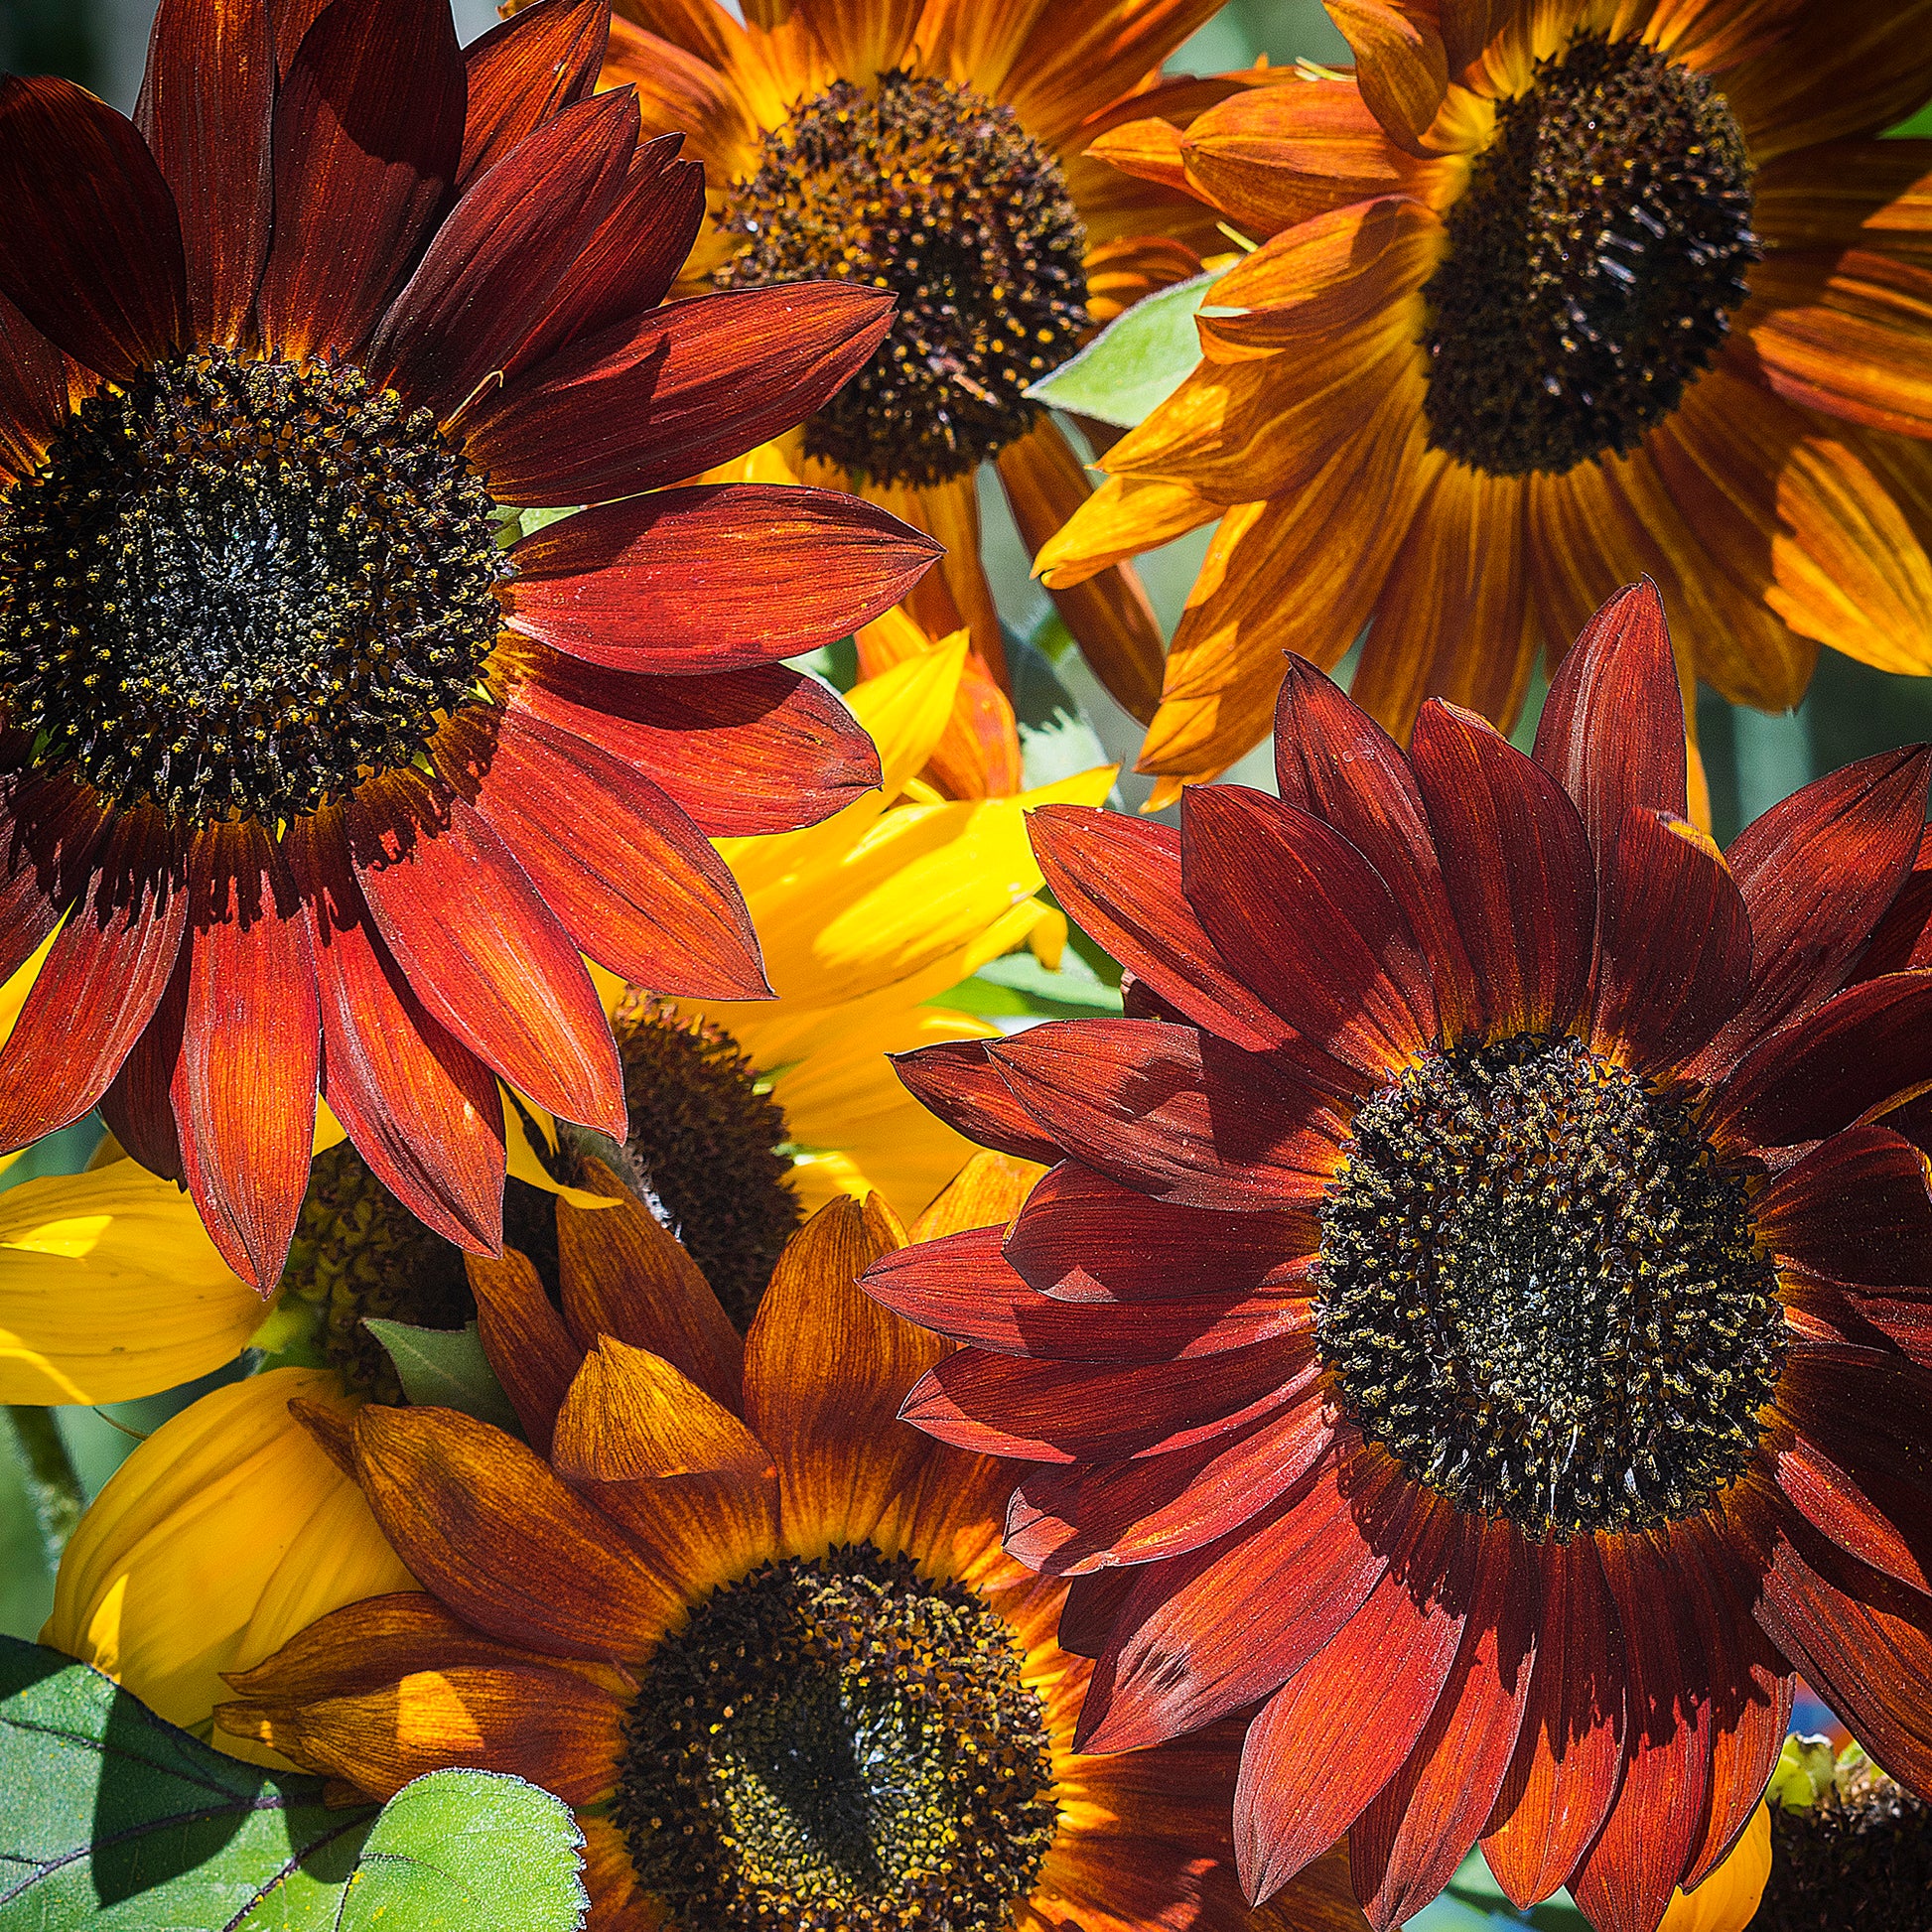 Evening Sun Mixed Colors Sunflowers seeds_fully matured and blooming vibrant multicolored petals.